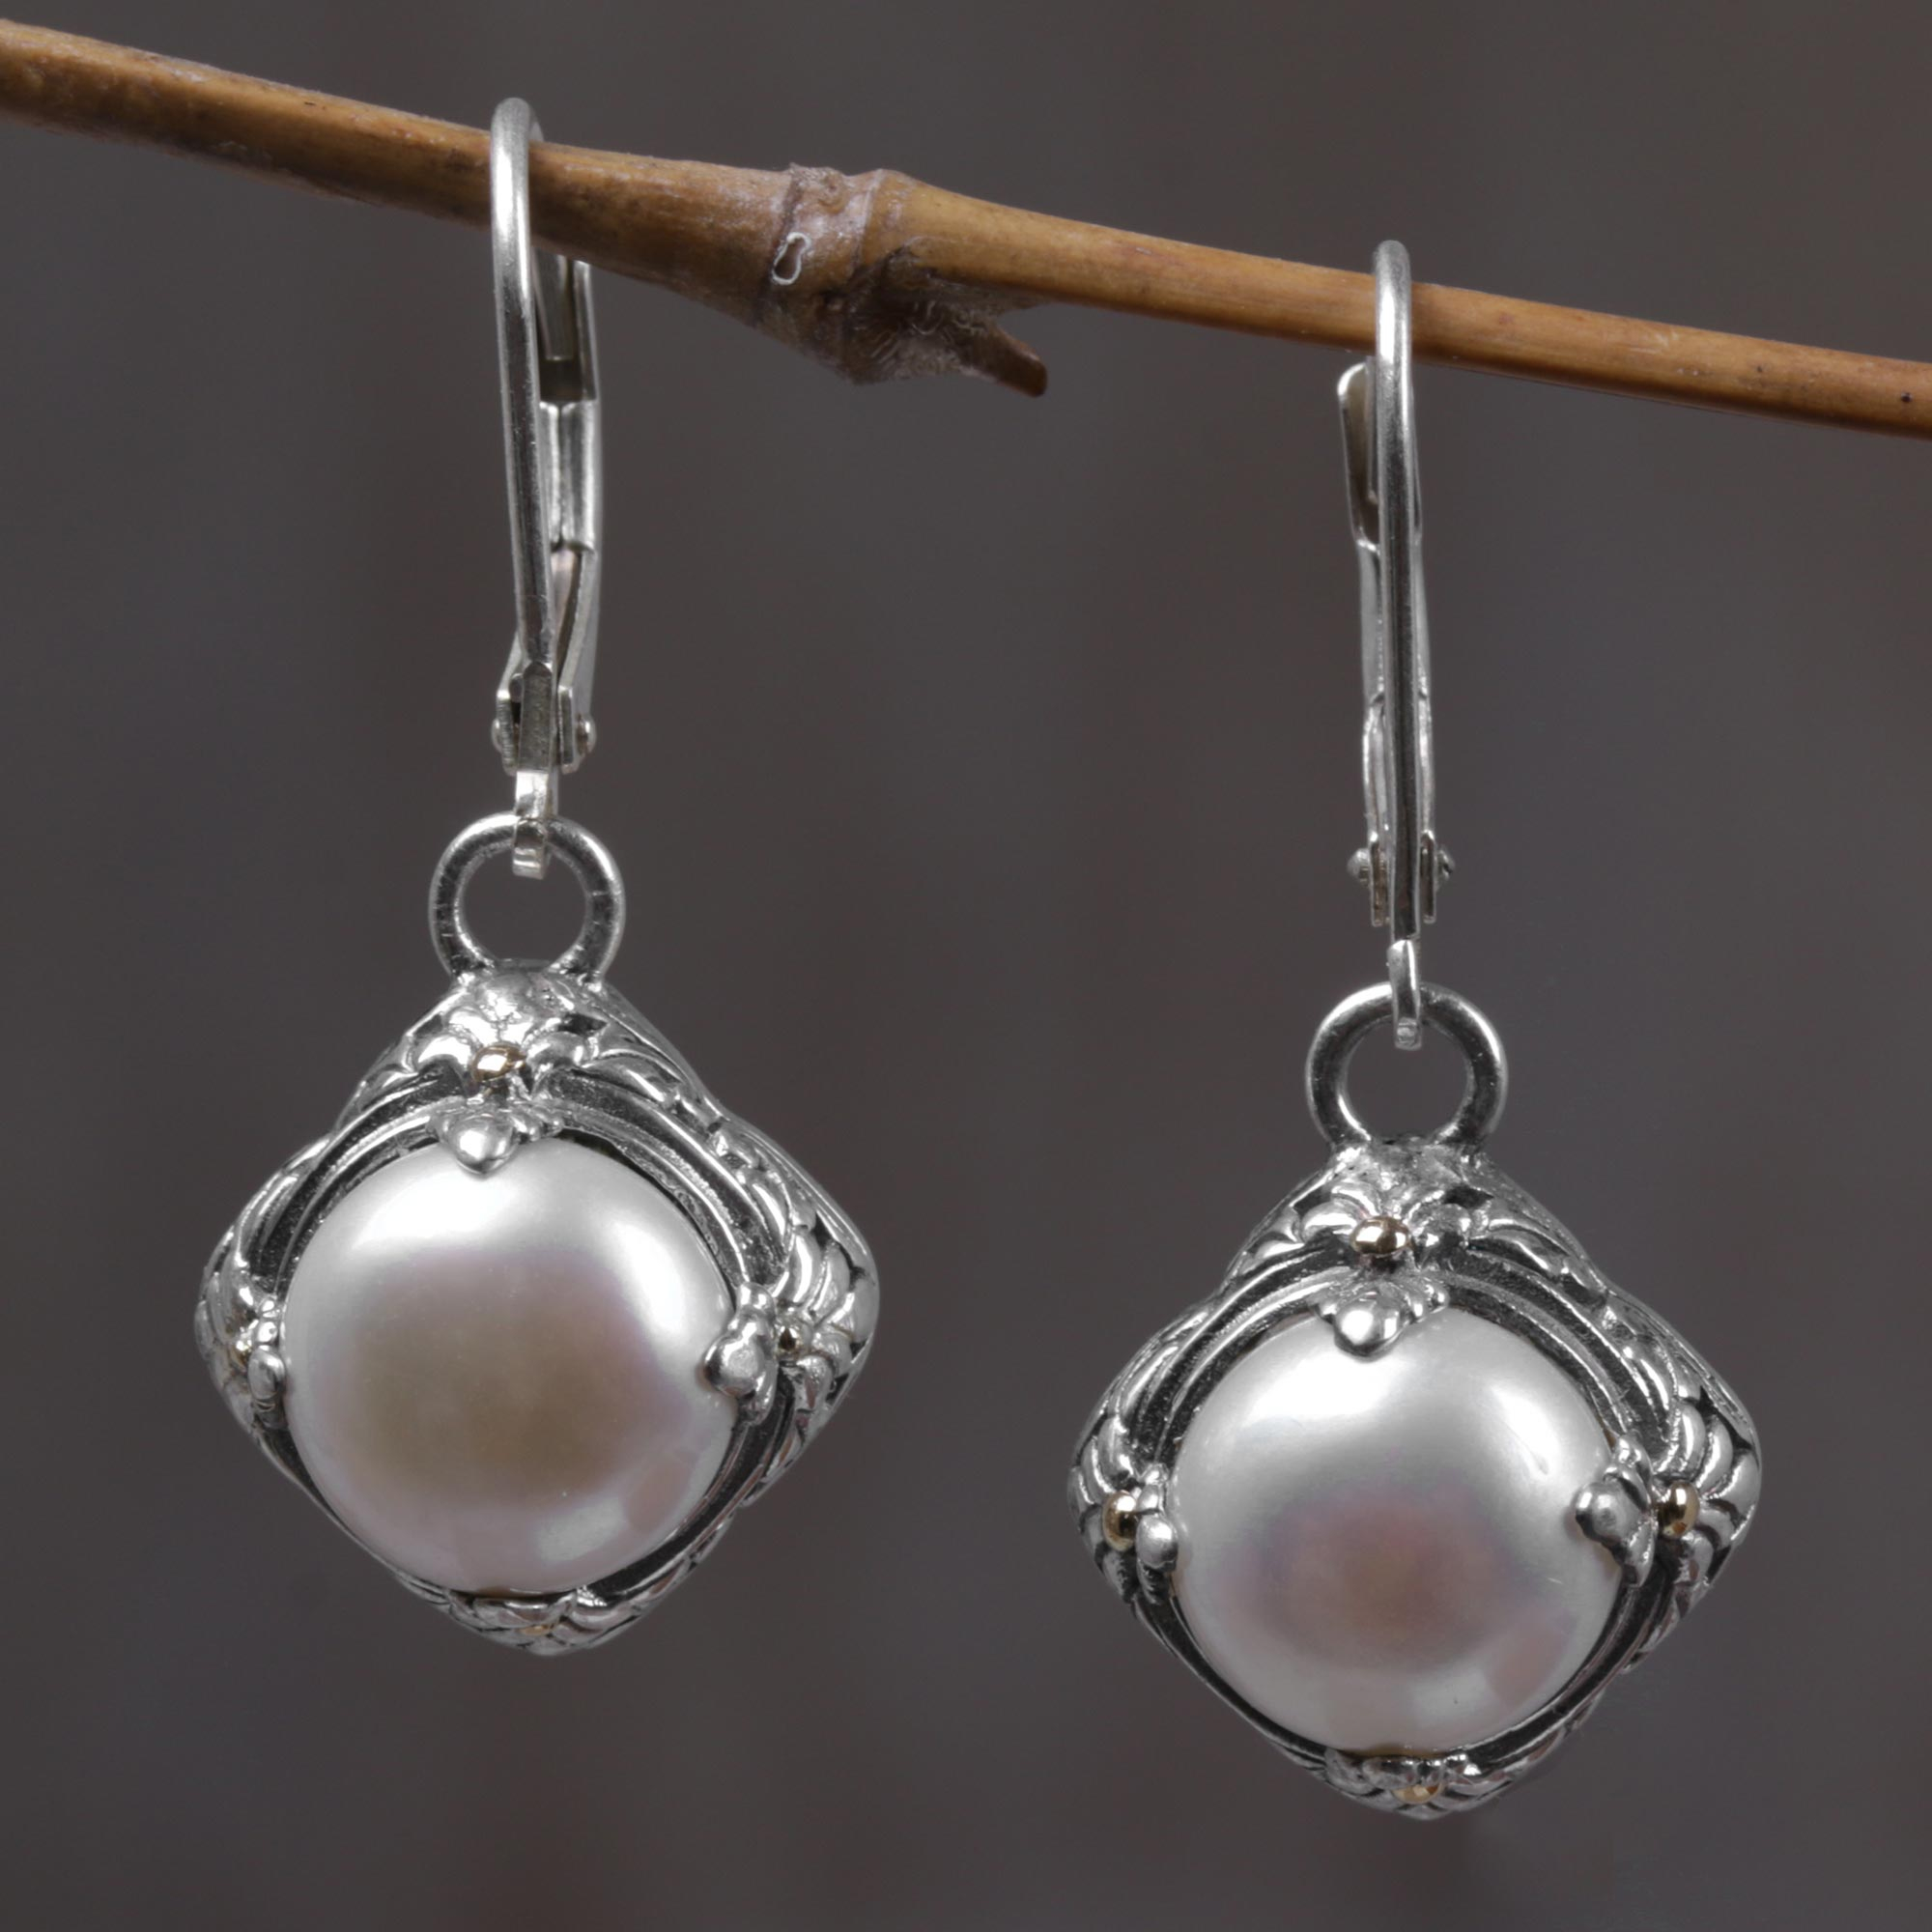 Fresh water pearls and vintage solid silver earrings